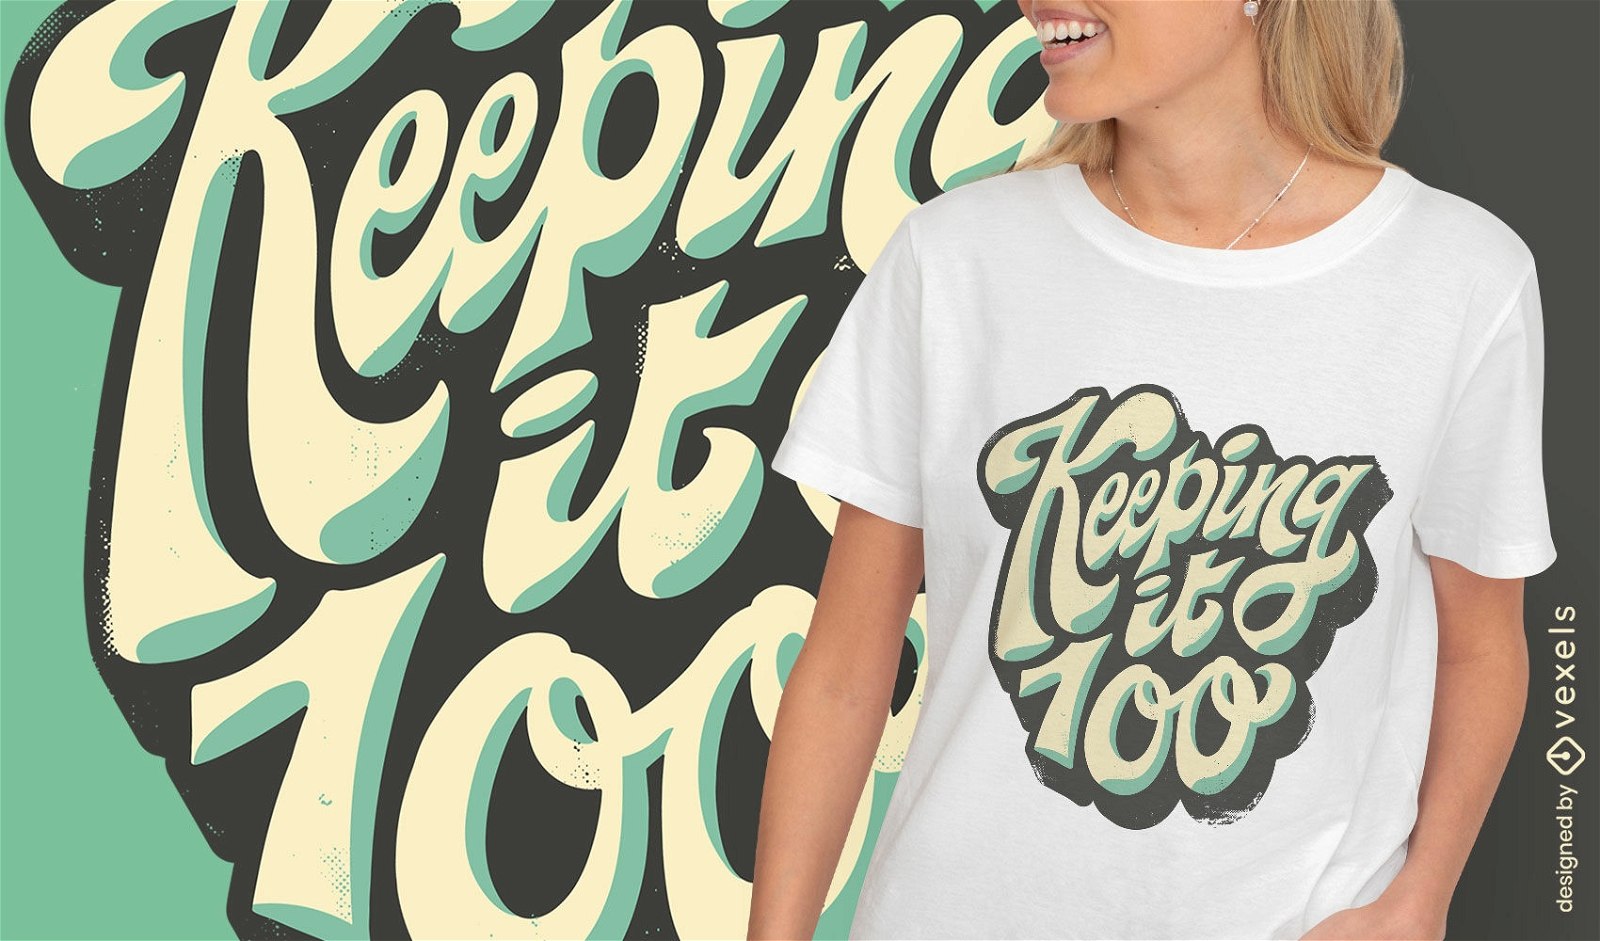 Keeping it 100 lettering t-shirt design